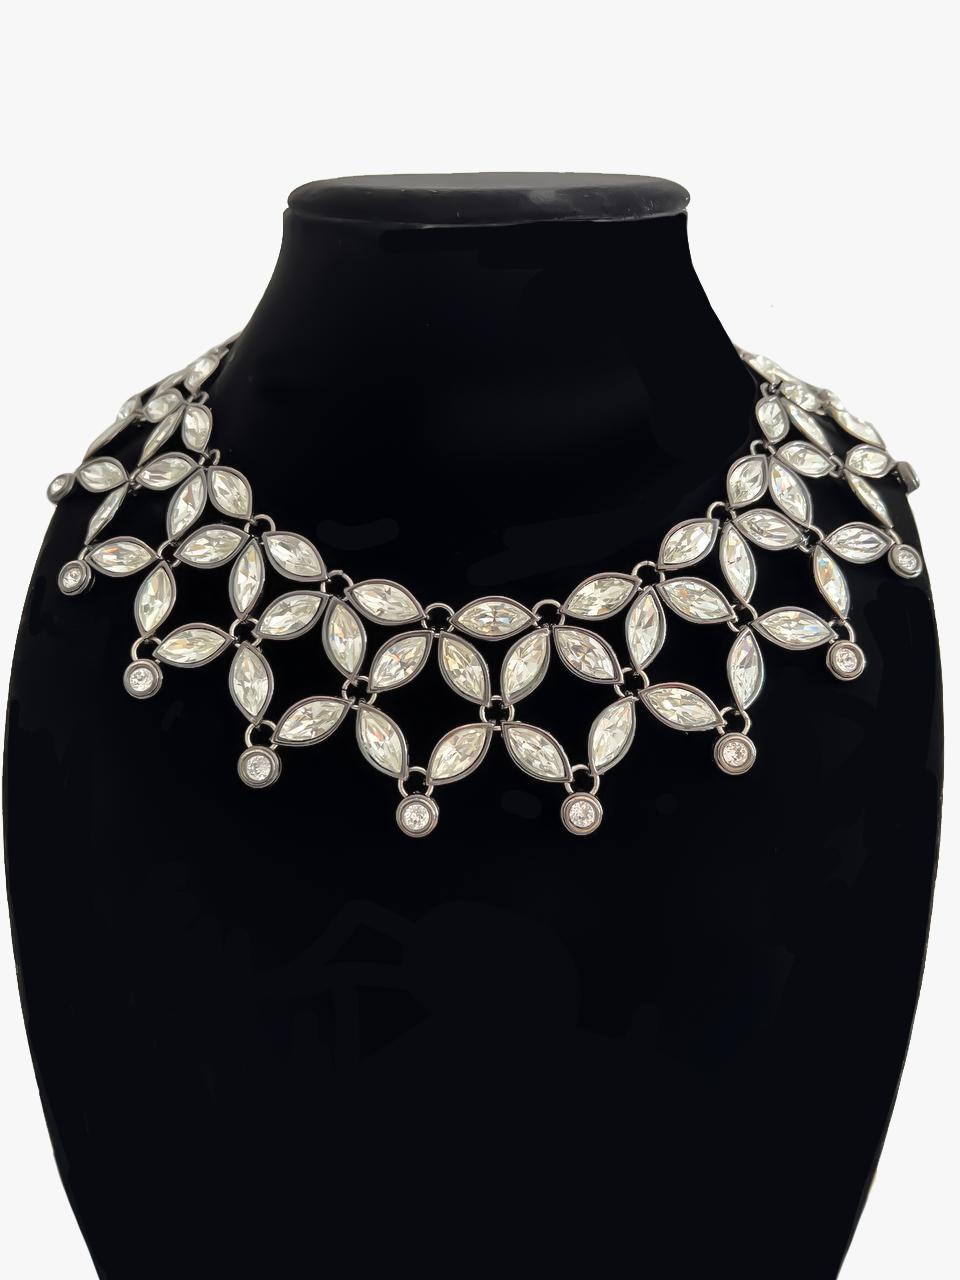 Stunning vintage crystal collar made by Robert Goossens for Yves Saint Laurent. 
Number 137 out of 500. 

Condition - very good. 

........Additional information ........

- Photo might be slightly different from actual item in terms of color due to